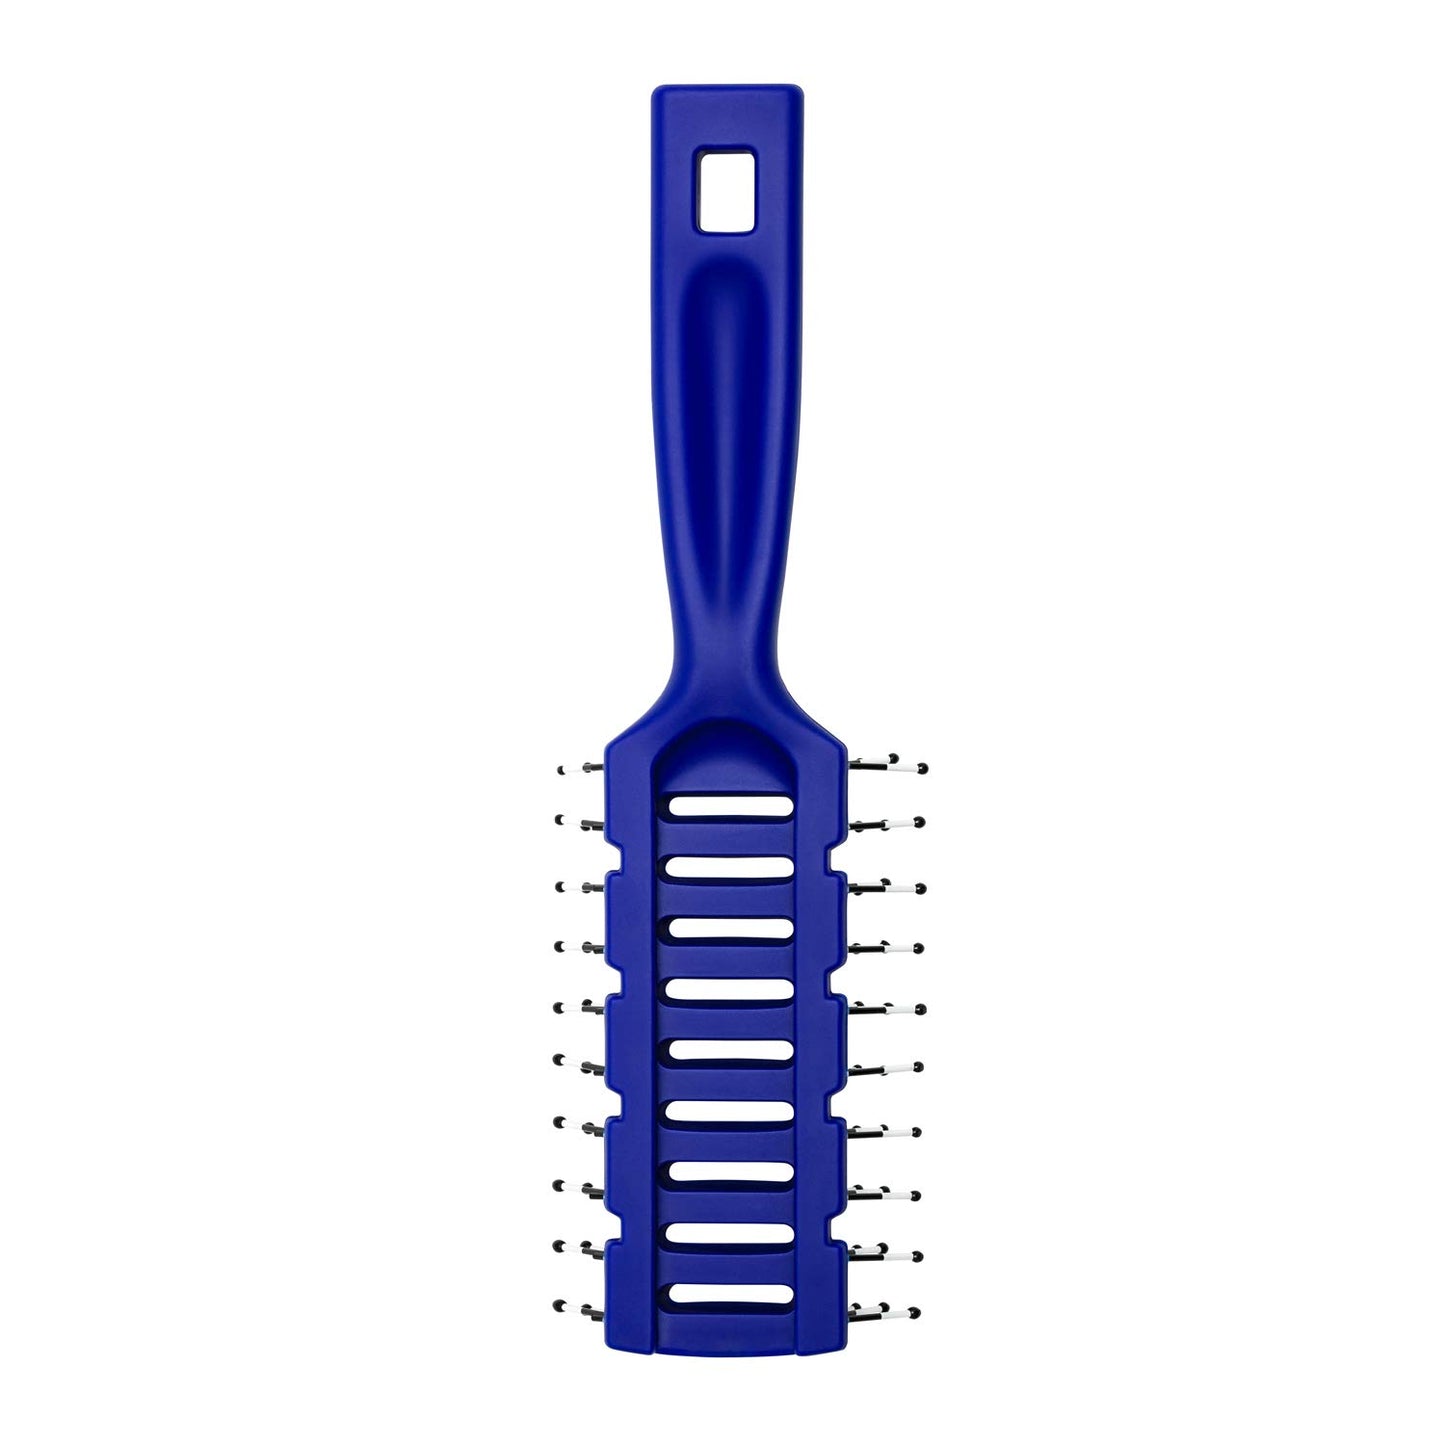 Johnny B Professional Vented Hair Brush for Blow Drying & Detangling, Ball-Tipped Small Bristles, Grooved Handle (Blue)